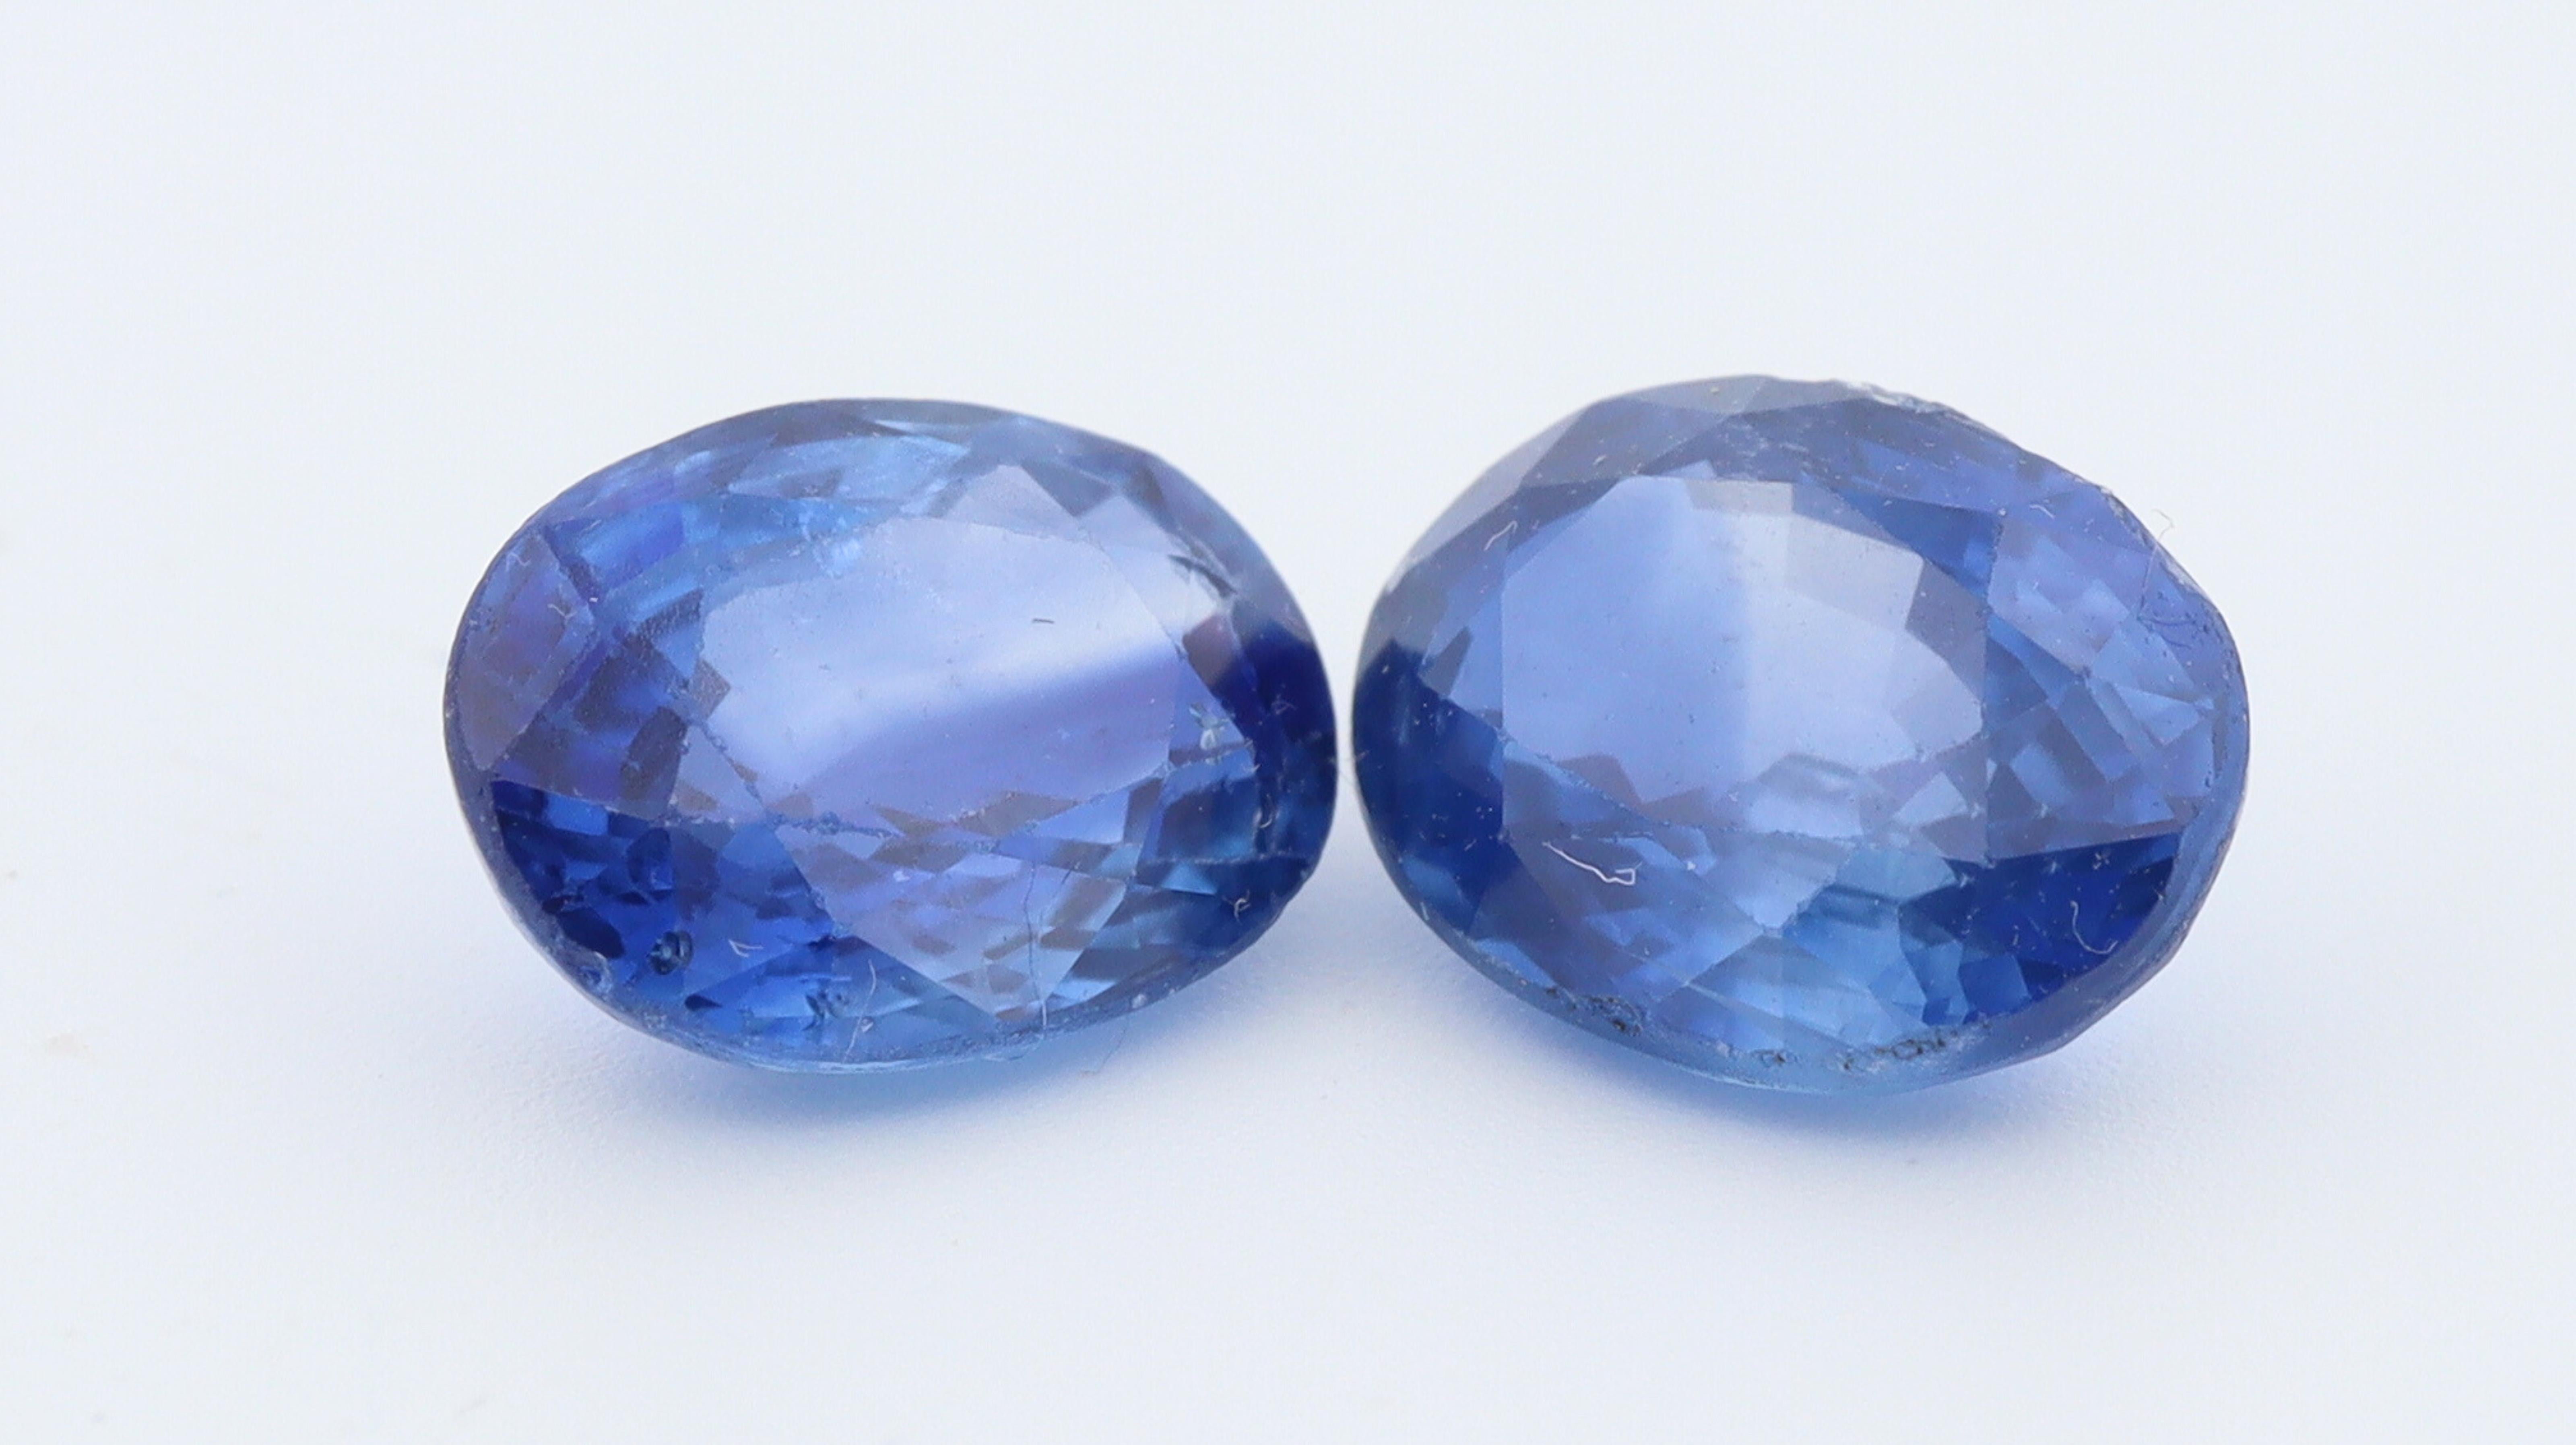 Sapphires, like Rubies, are a variation from the mineral species corundum, composed of aluminum and oxygen. It is a fascinating gemstone mined in Australia, Burma, Cambodia, Sri Lanka, Madagascar, etc. with distinct features, color saturation; and